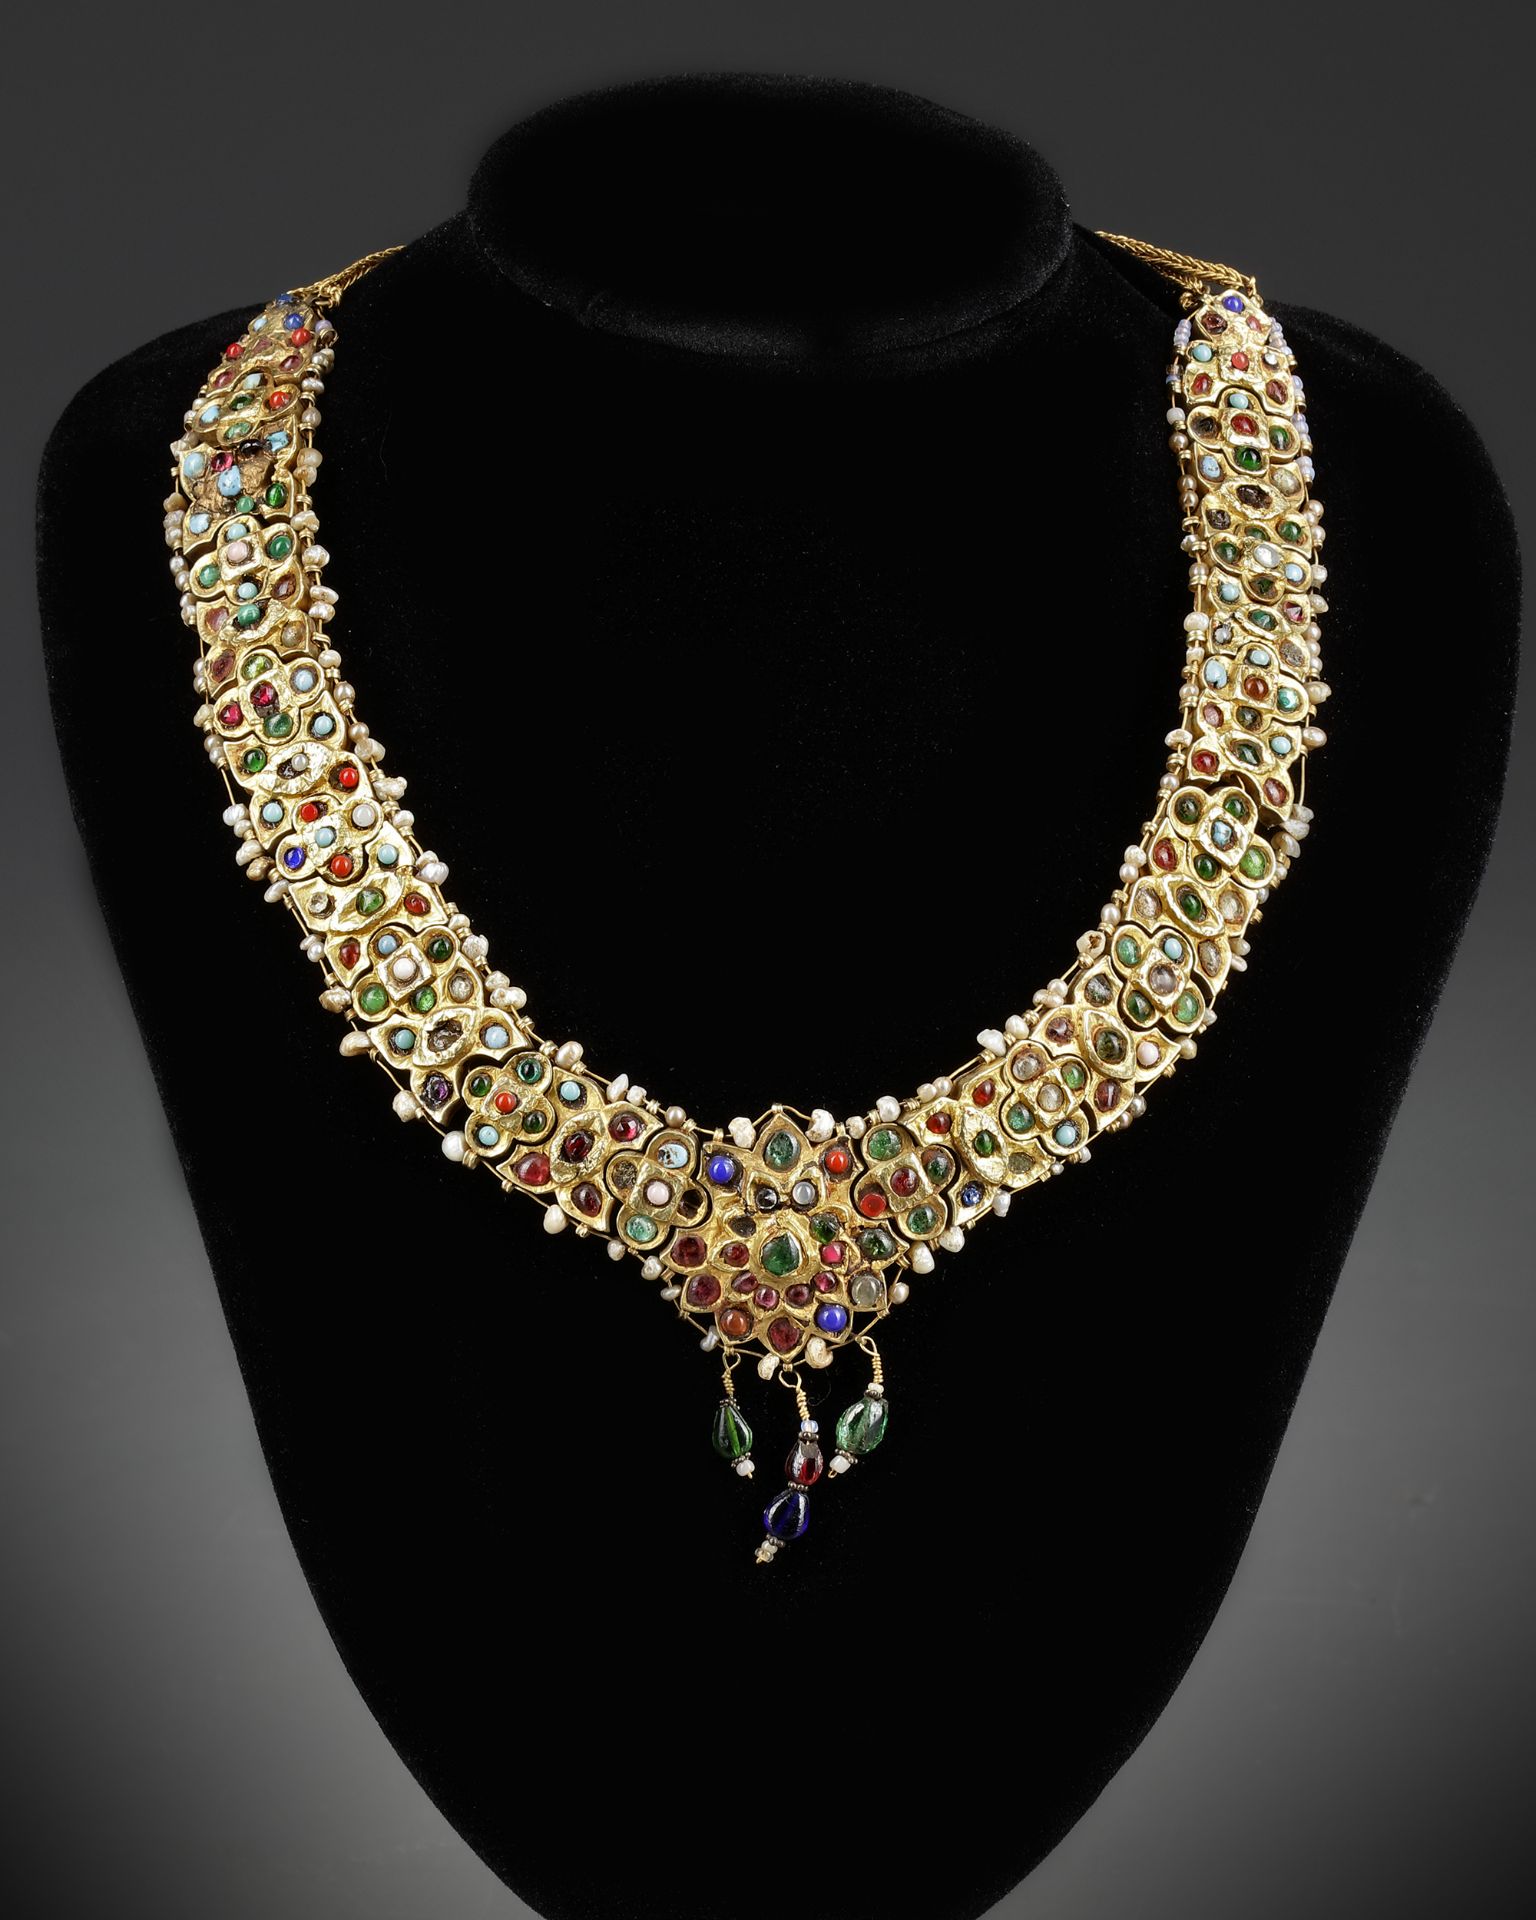 A MUGHAL GEM-SET ENAMELED GOLD NECKLACE, LATE 18TH CENTURY - Image 8 of 8